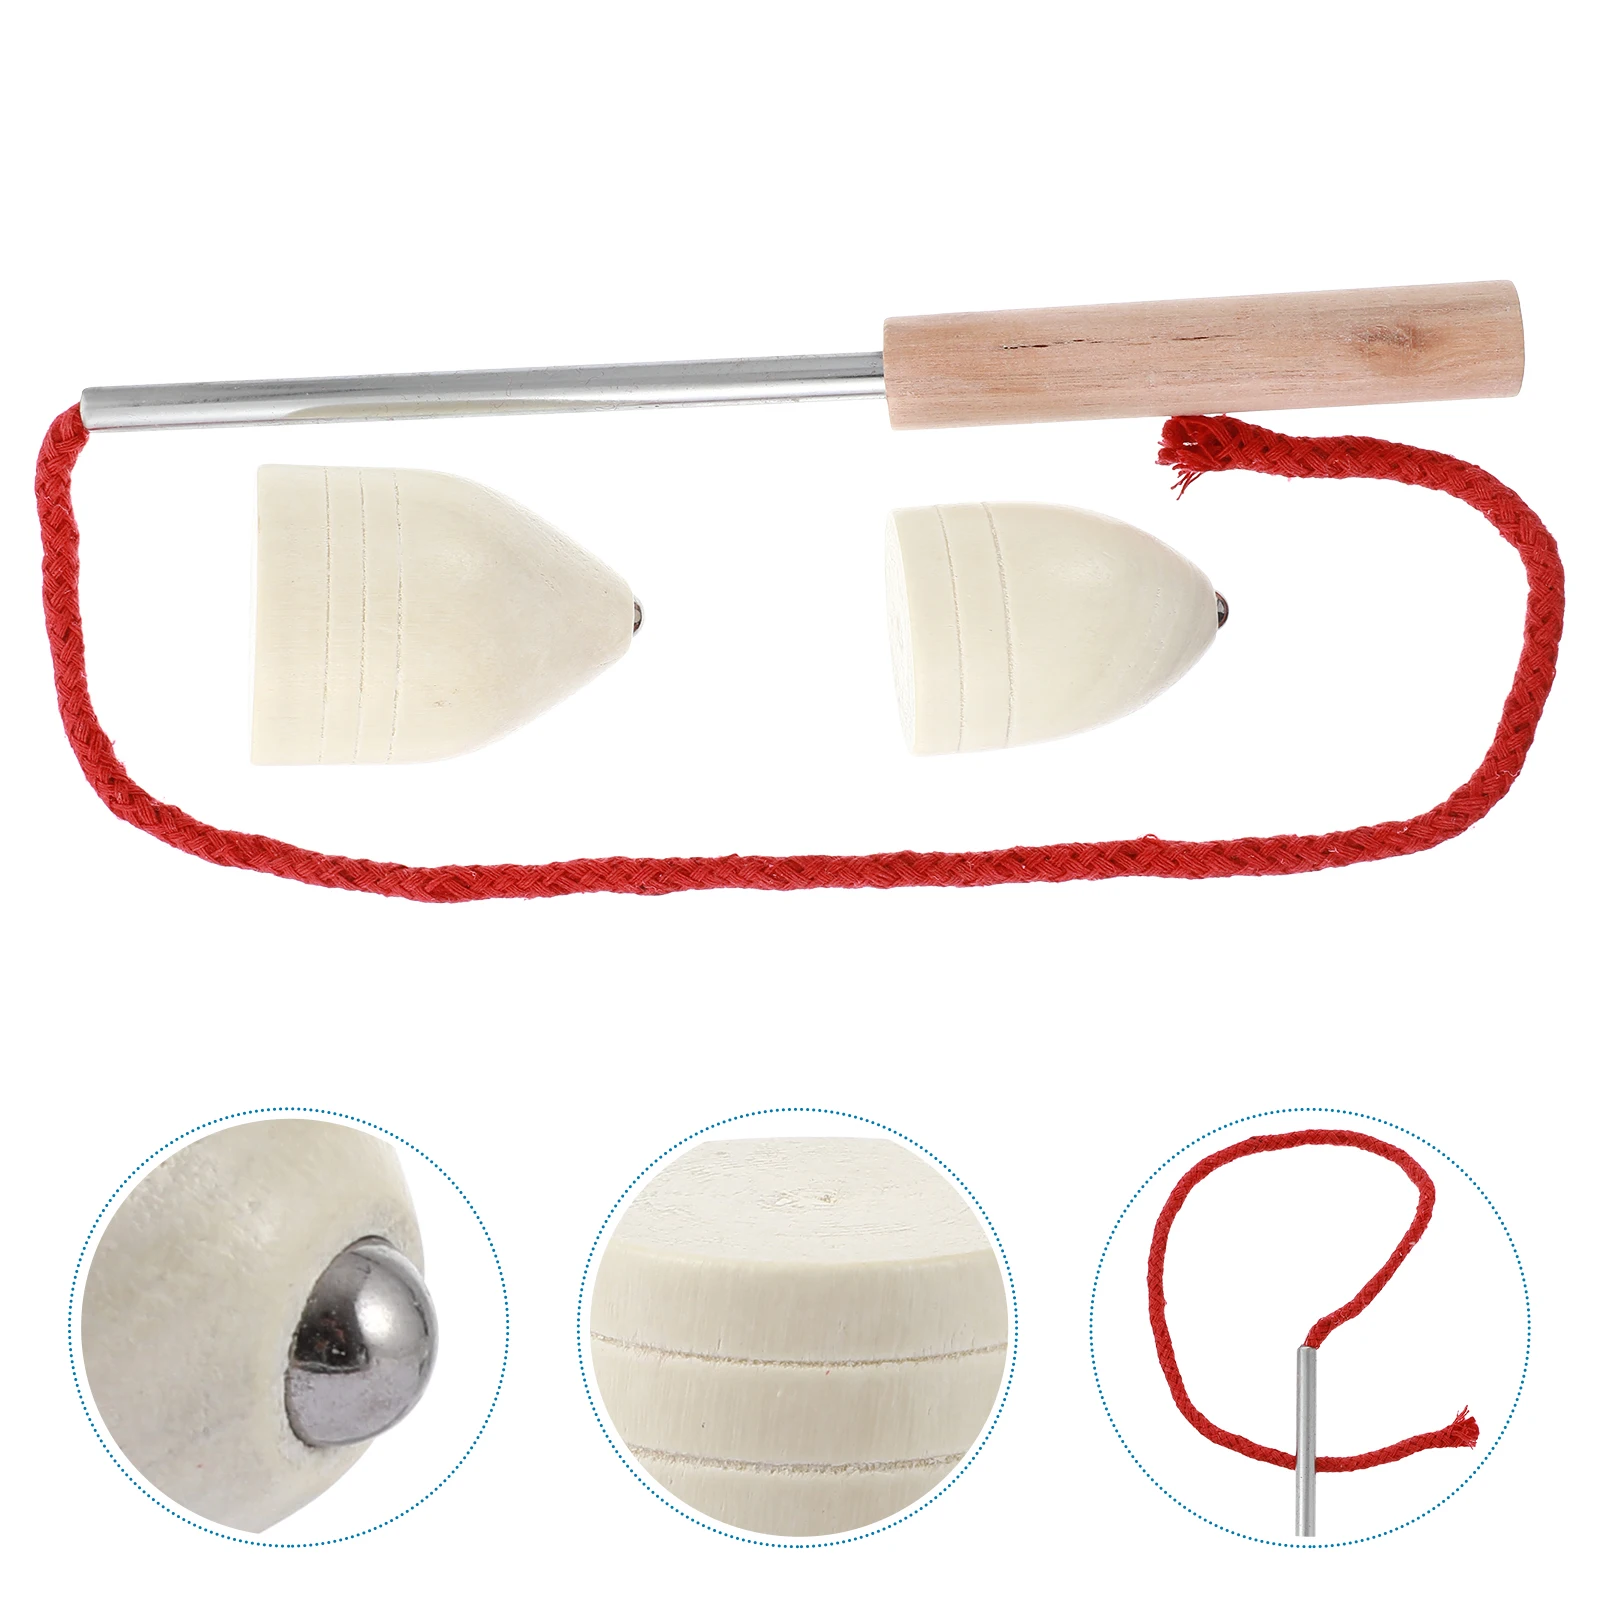 Details about  / 5 Sets Wooden Creative Whipping Tops With String Vintage Spin Tops